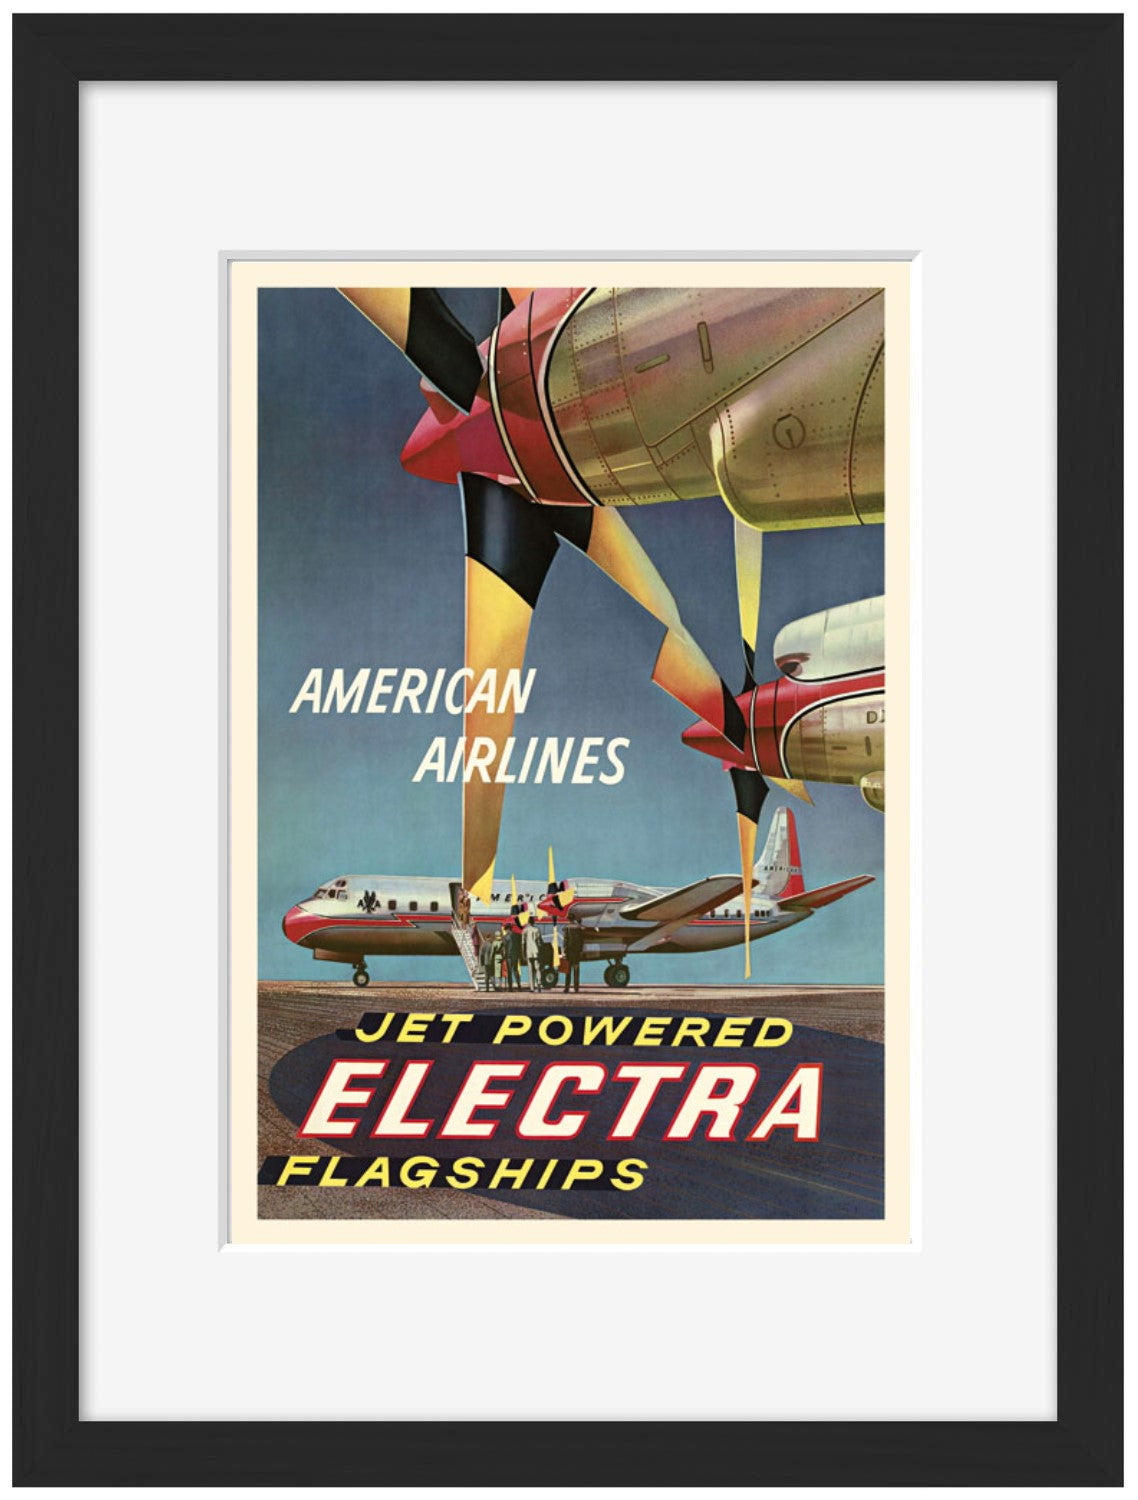 American Airlines-airlines, print-Framed Print-30 x 40 cm-BLUE SHAKER